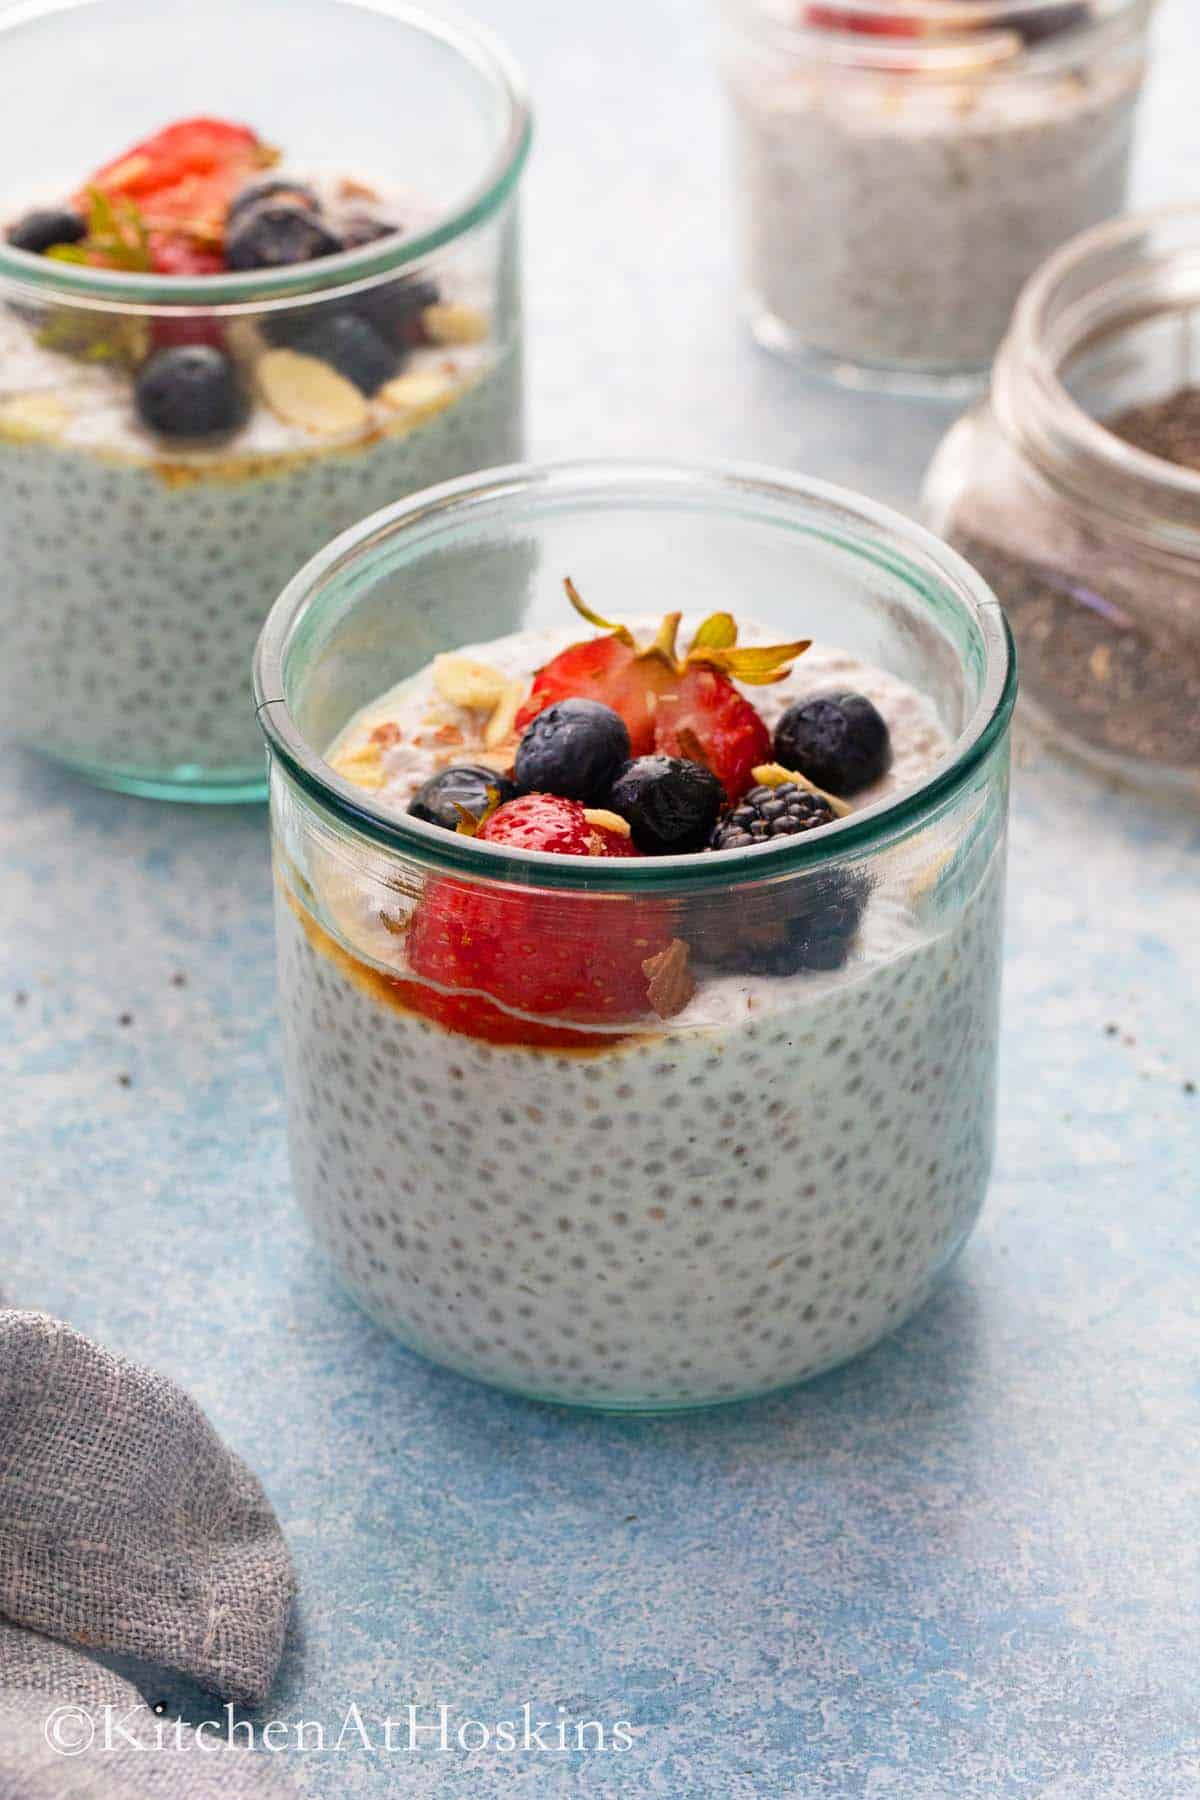 chai pudding made with coconut milk in jars topped with berries.